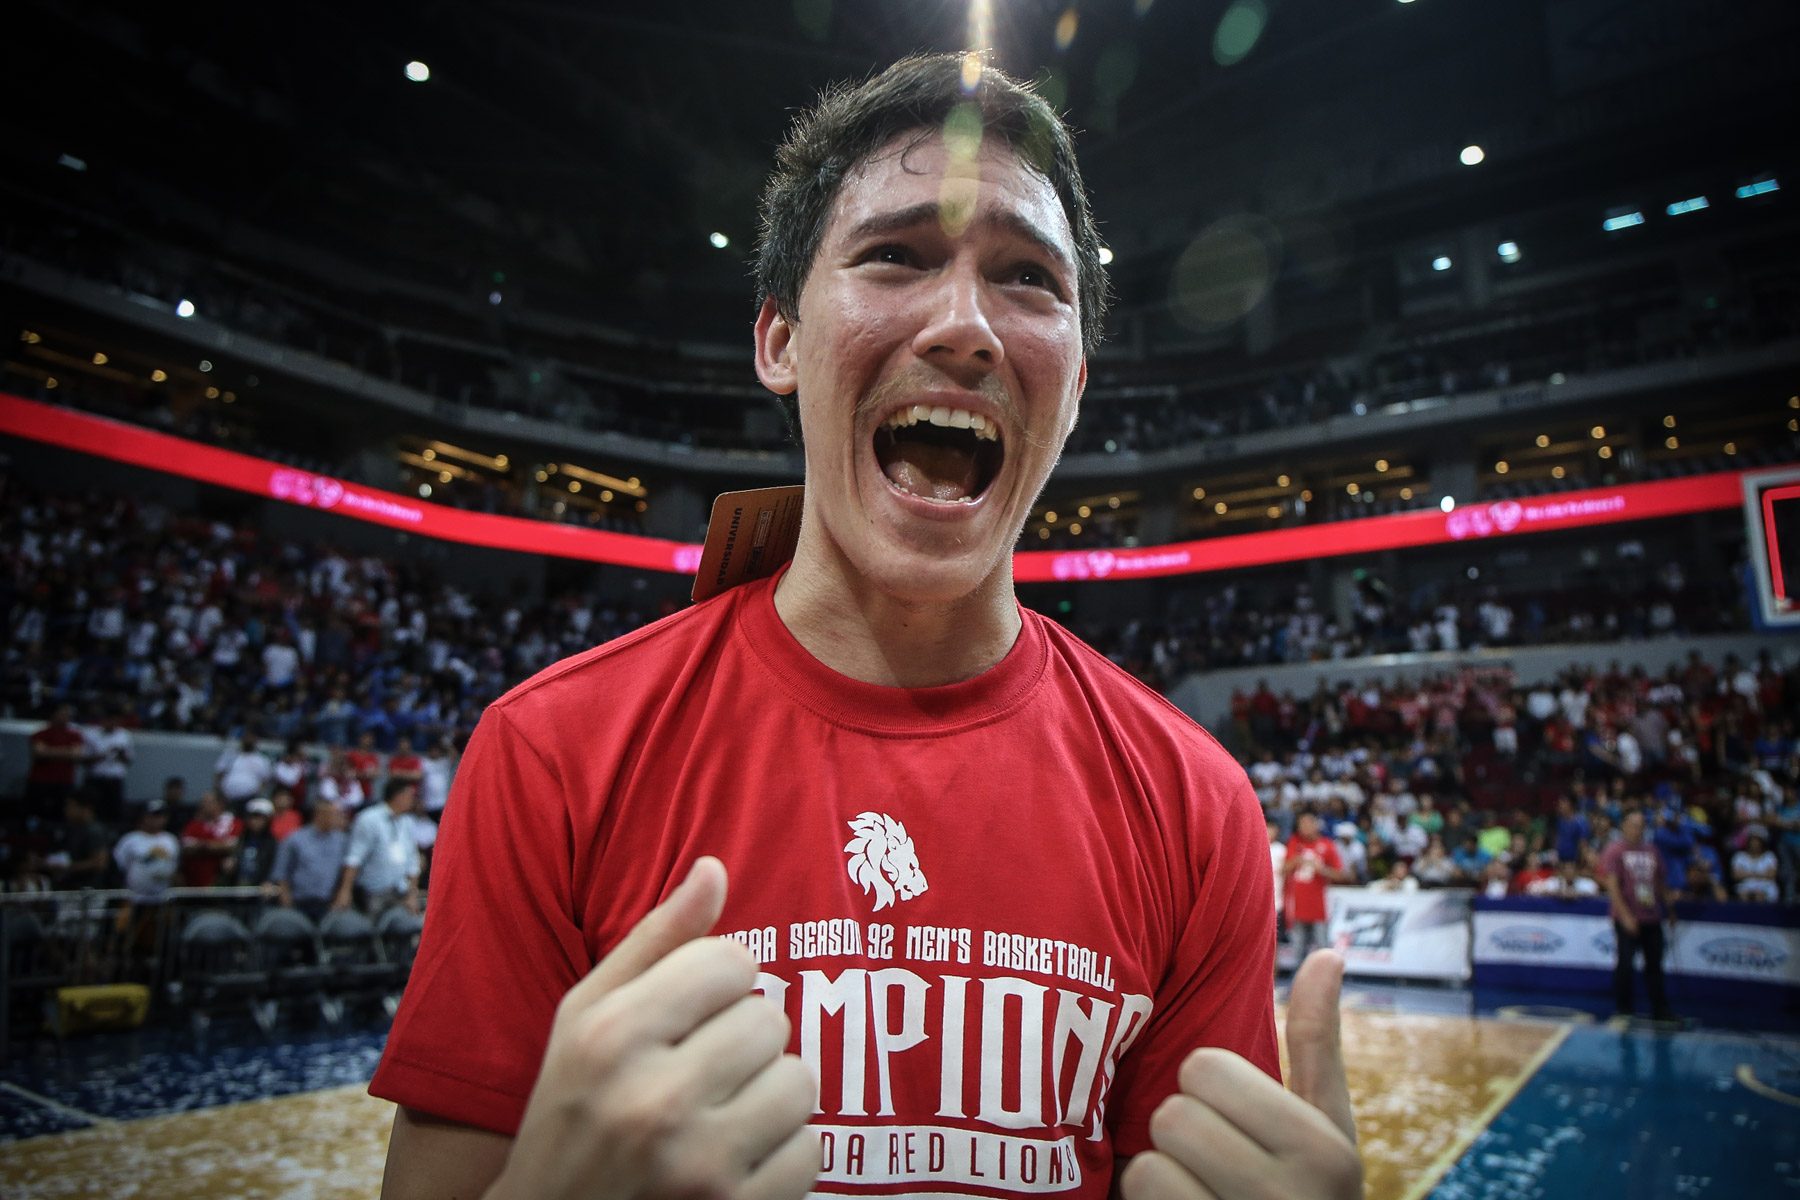 Finals-bound Bolick dismisses Stags’ rough play